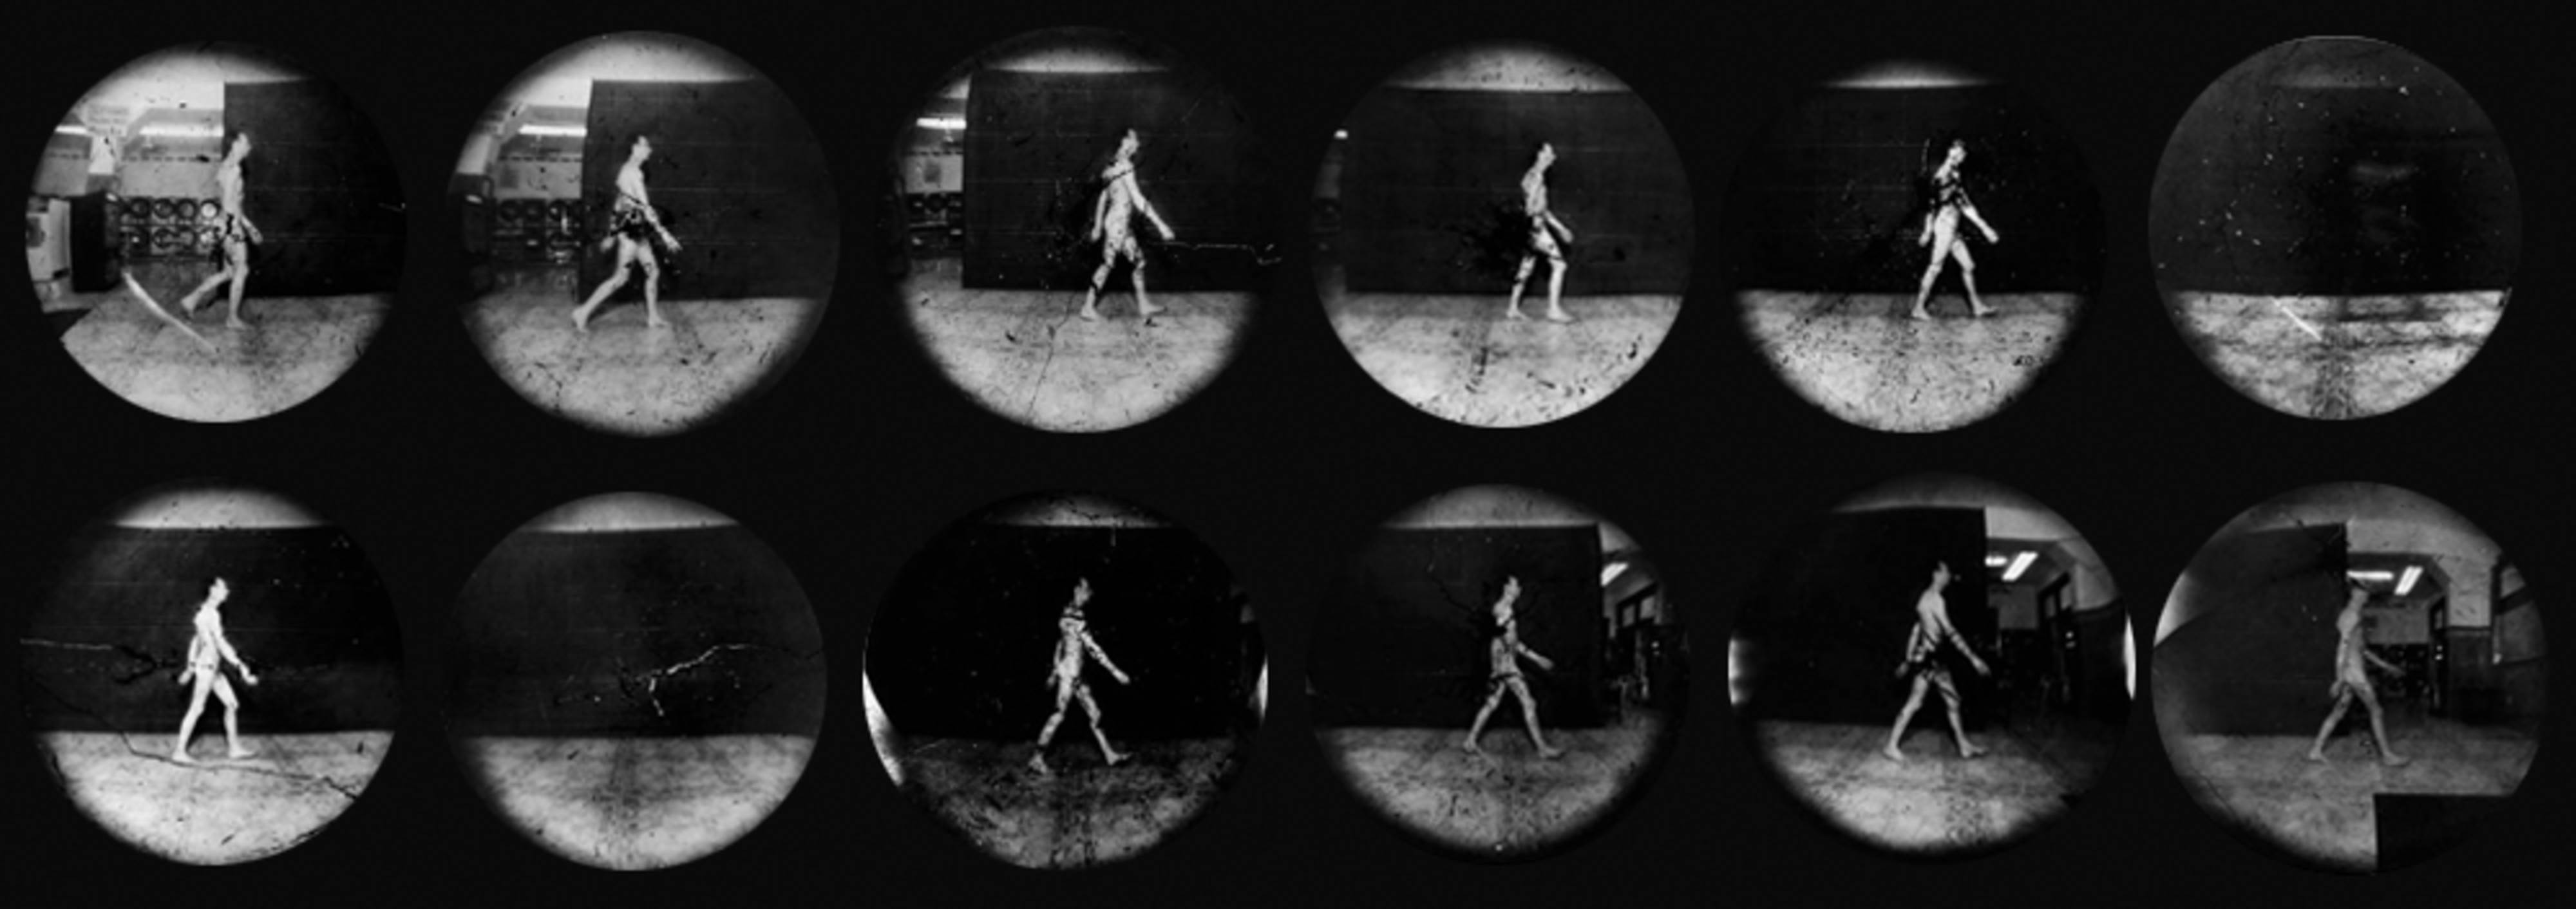 Steven Pippin, Walking Naked, 1997, SFMOMA Archive